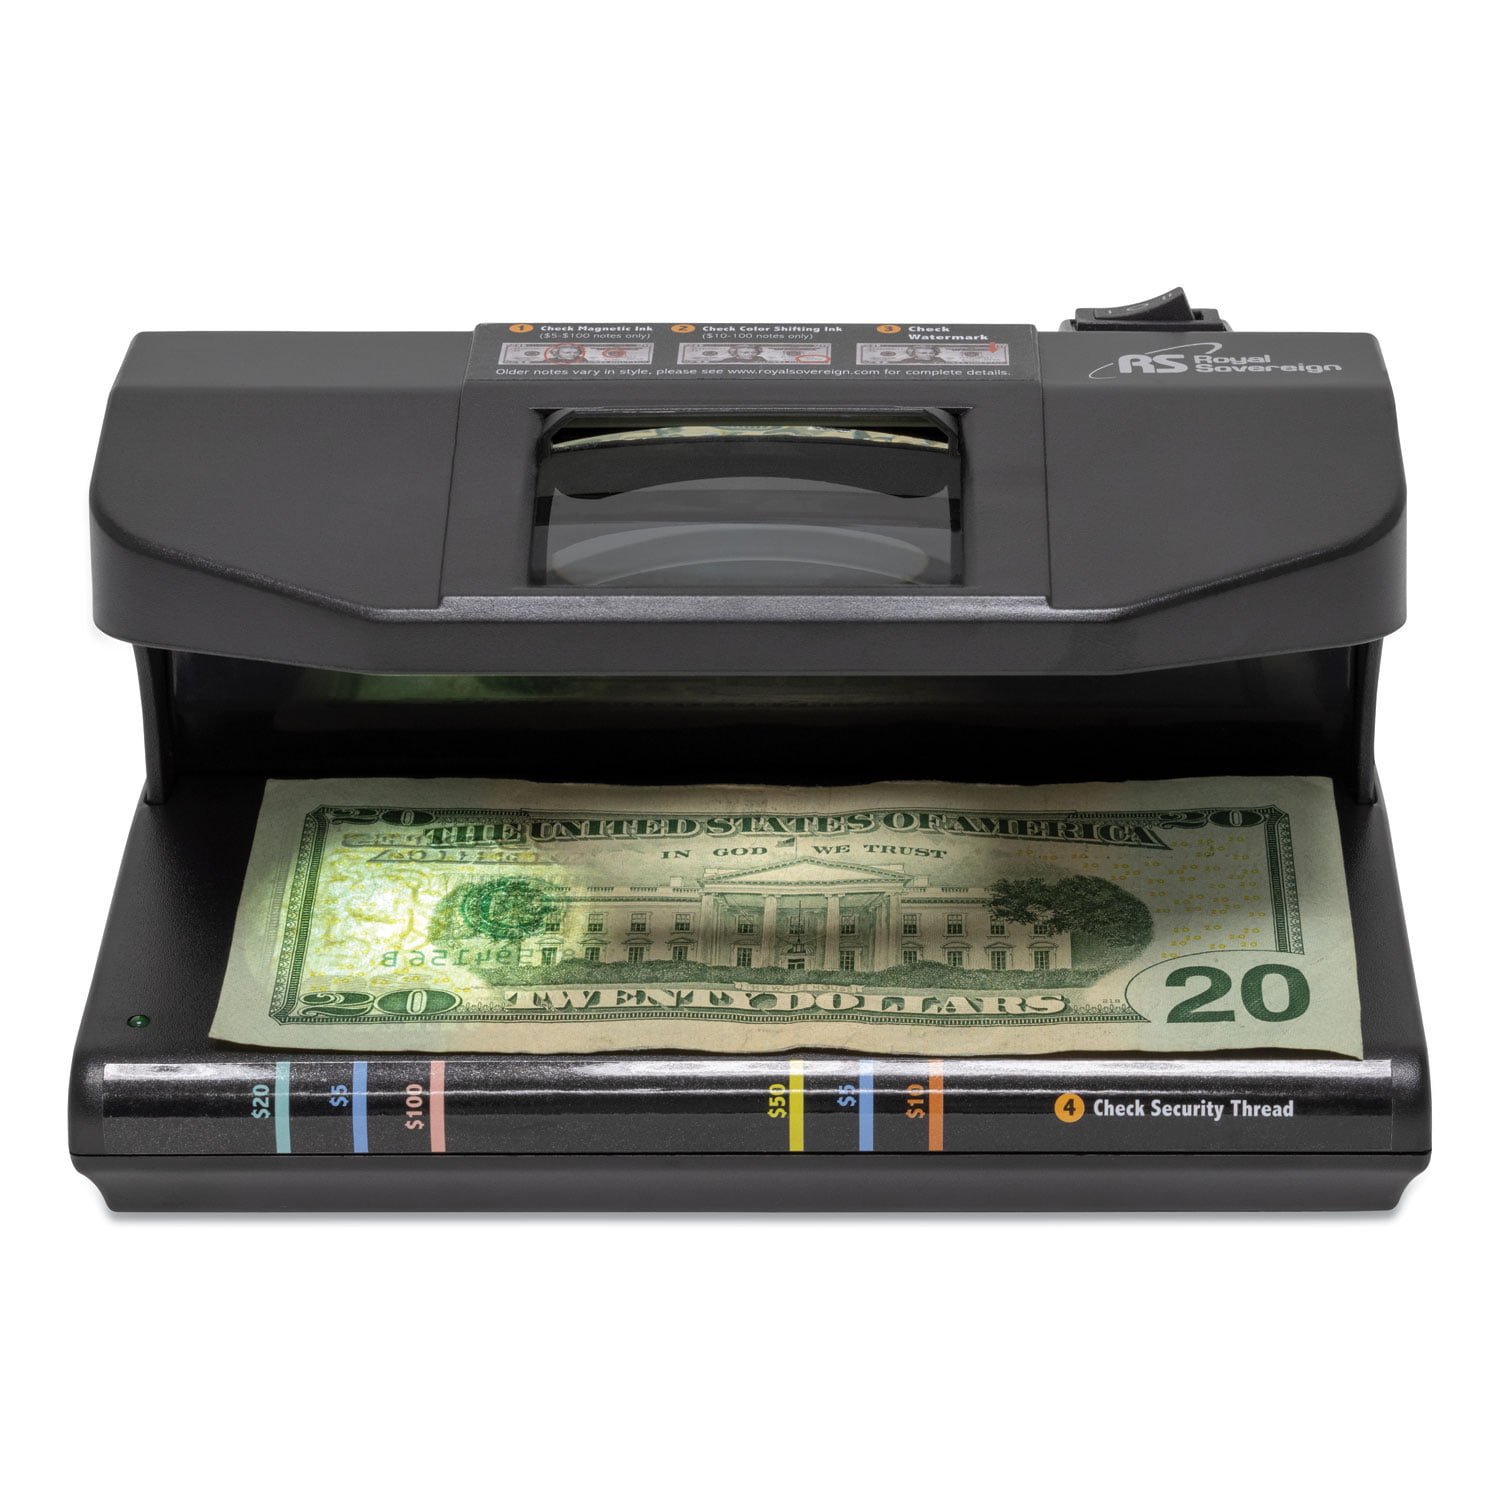 Royal Sovereign 4-Way Ultraviolet and Magnetic Counterfeit Detector . RCD-2000 